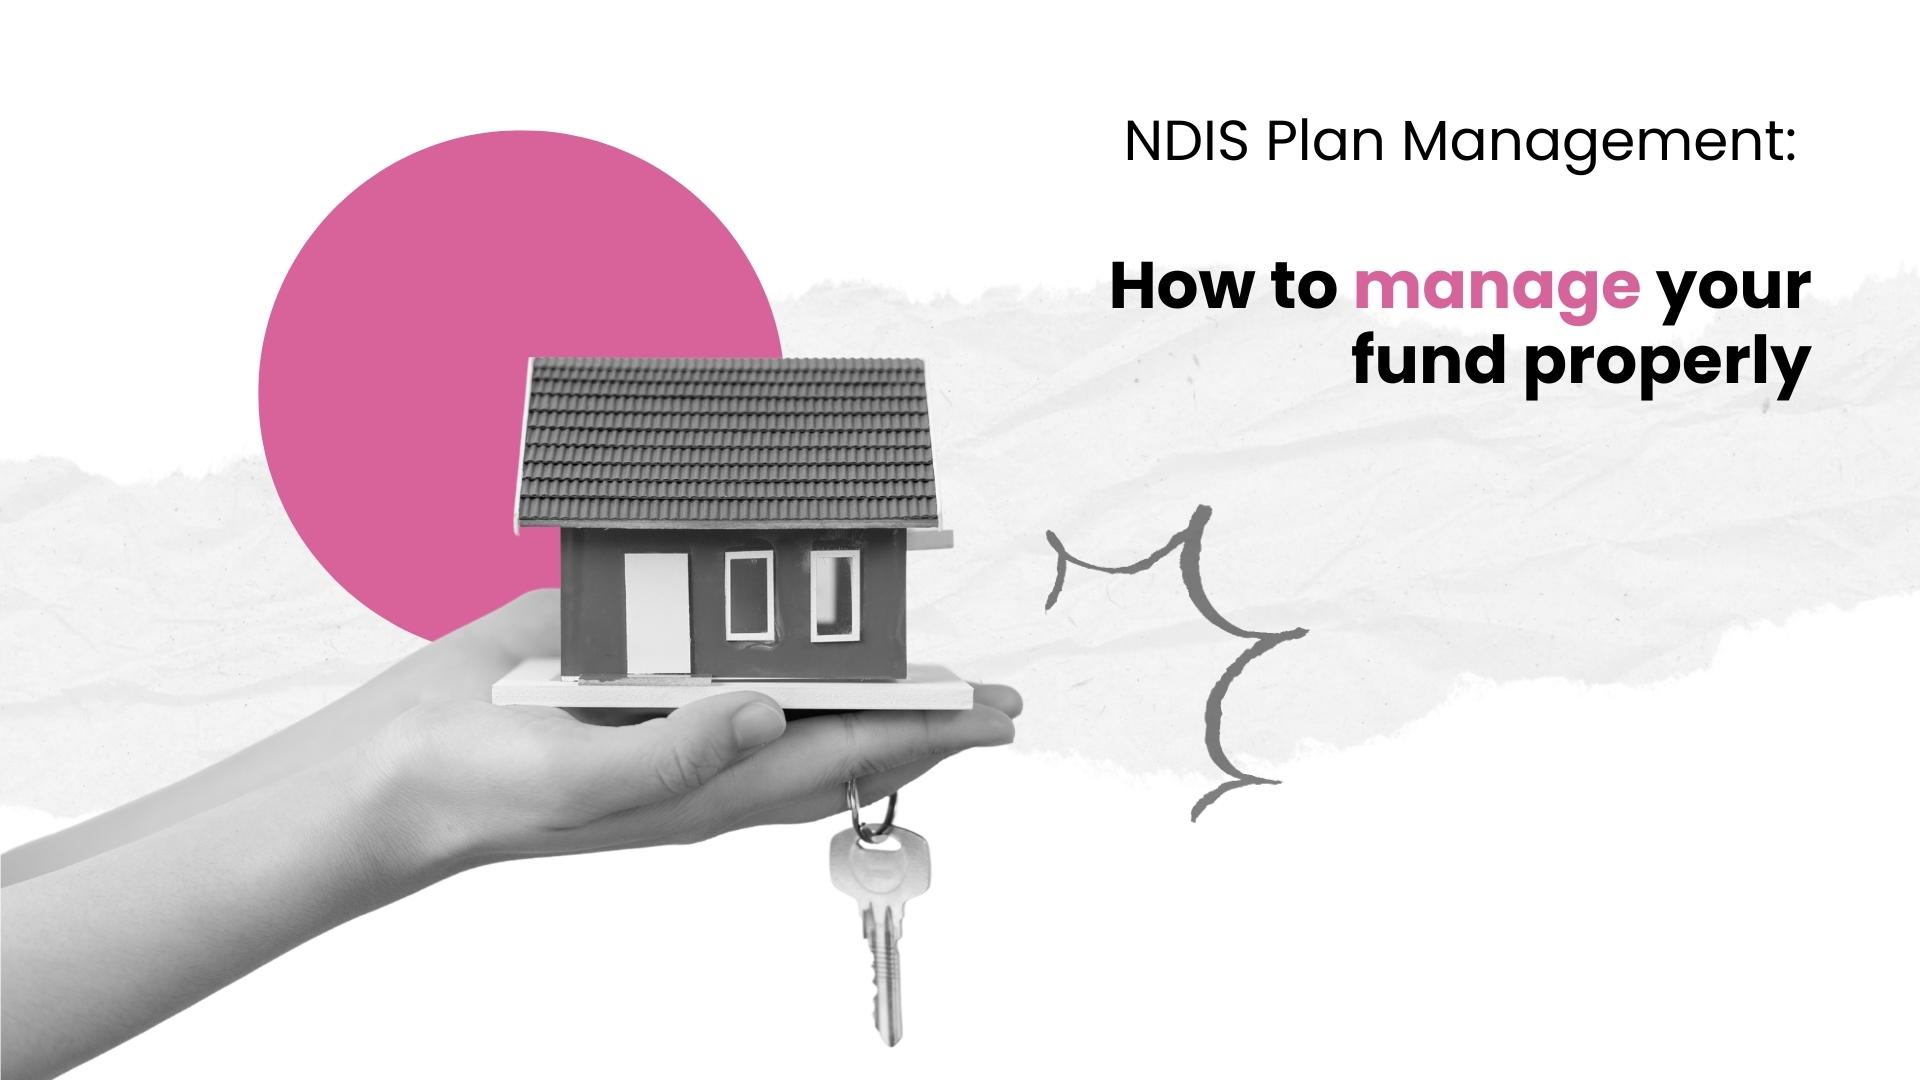 NDIS Plan Management How to manage your fund properly